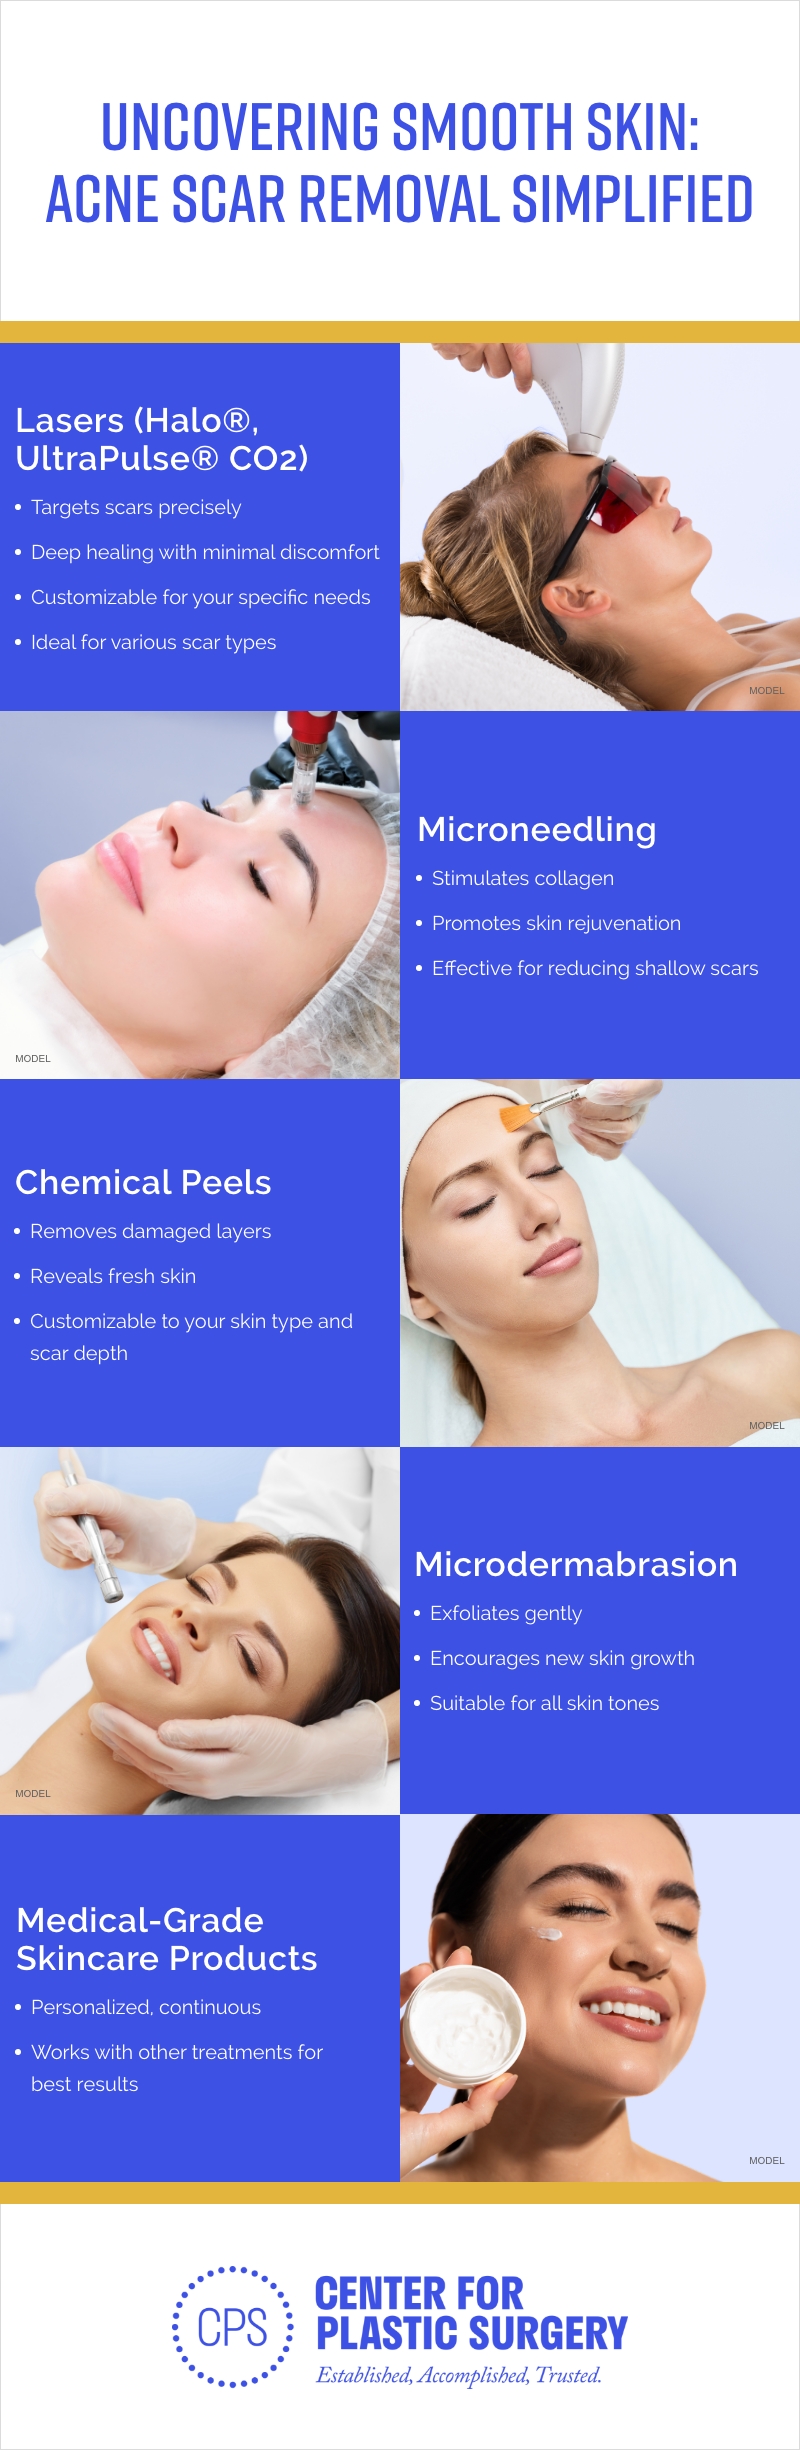 A review of the best acne scar removal treatments and their benefits, including Halo and UltraPulse CO2 lasers, microneedling, microdermabrasion, chemical peels, and medical-grade skincare products.